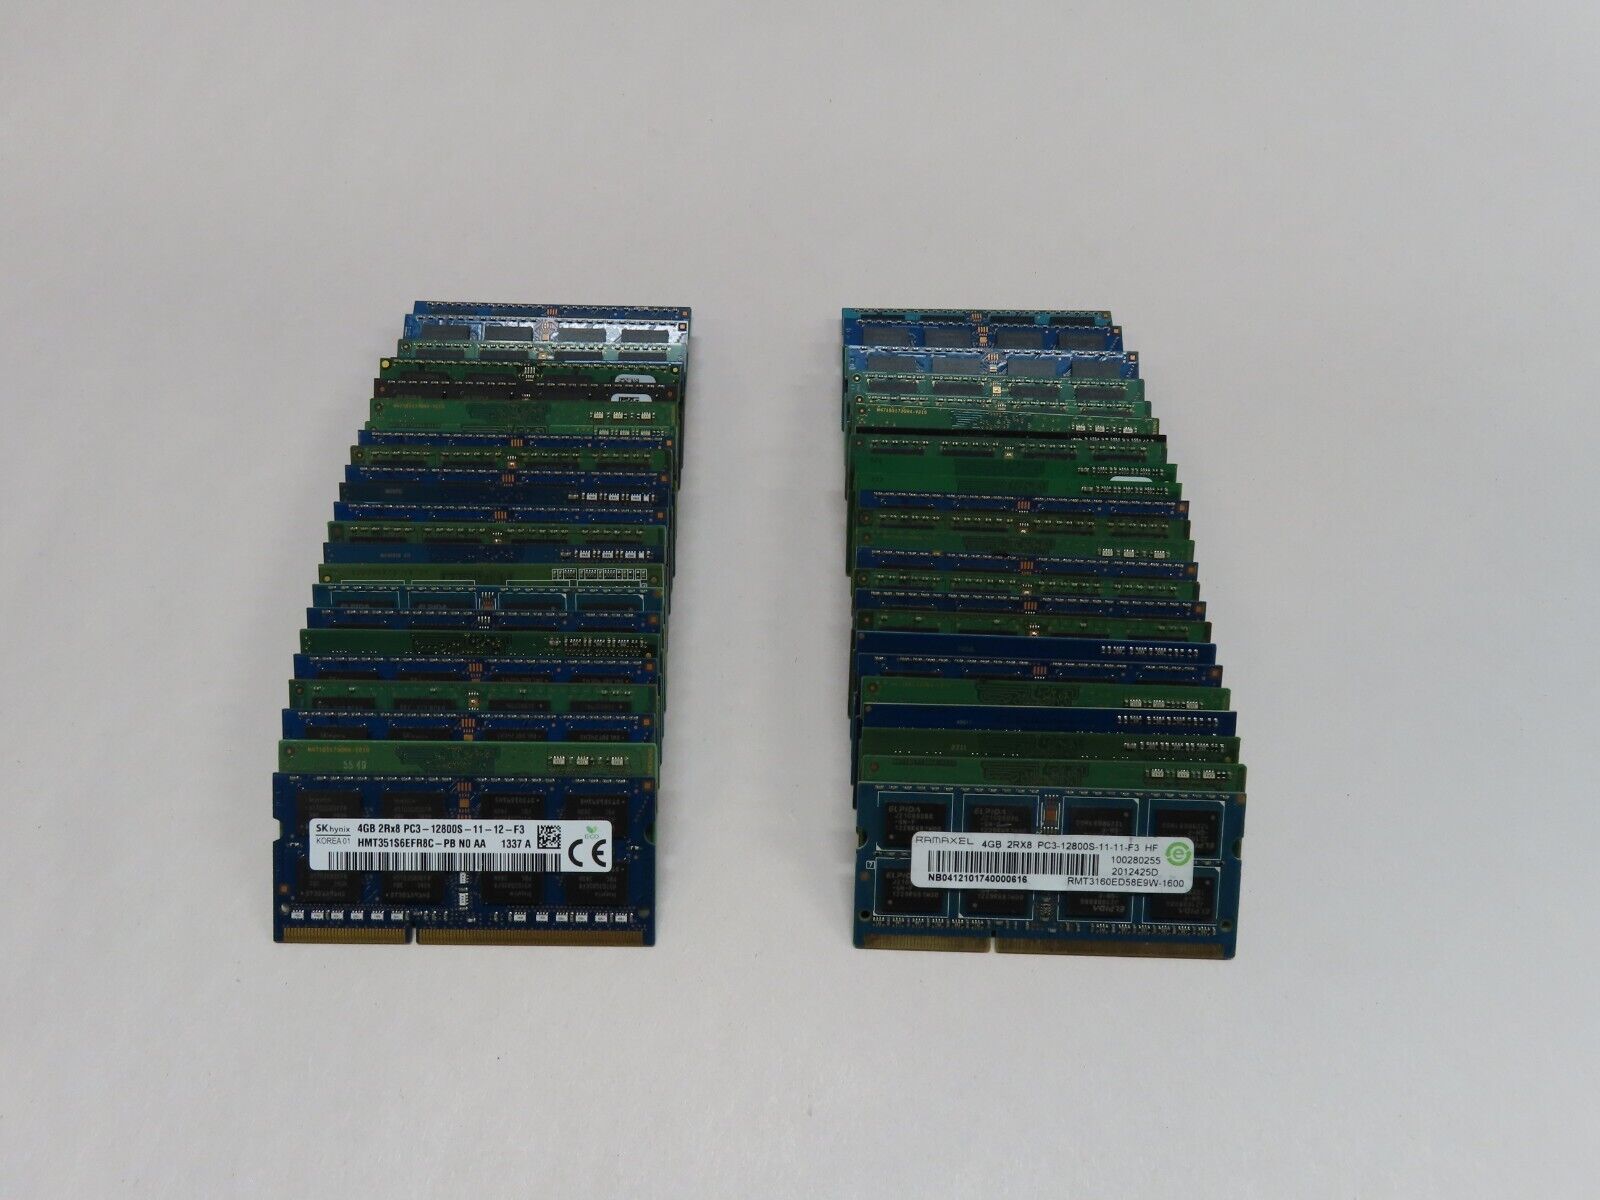 LOT OF 50X MIXED BRAND 4GB PC3-12800S DDR3 1600 SDRAM LAPTOP MEMORY